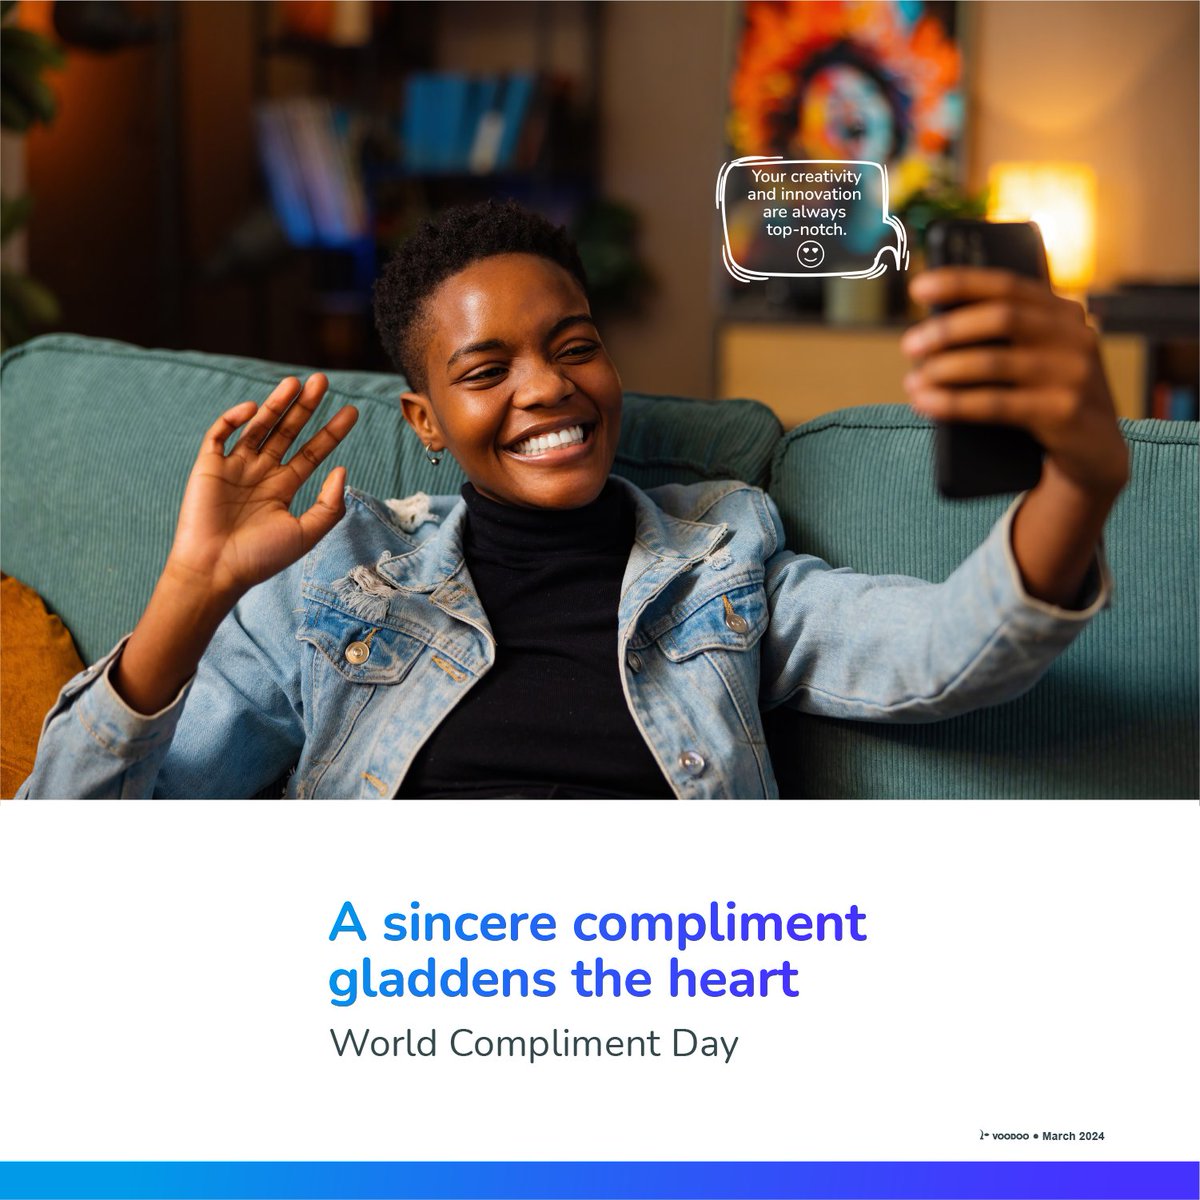 😊🌈 It's compliment day.

Let's spread the joy around us with positive words, because a heartfelt compliment brightens up the day 🌞.

#JMDuCompliment #PositiveDay #SpreadThePositivity